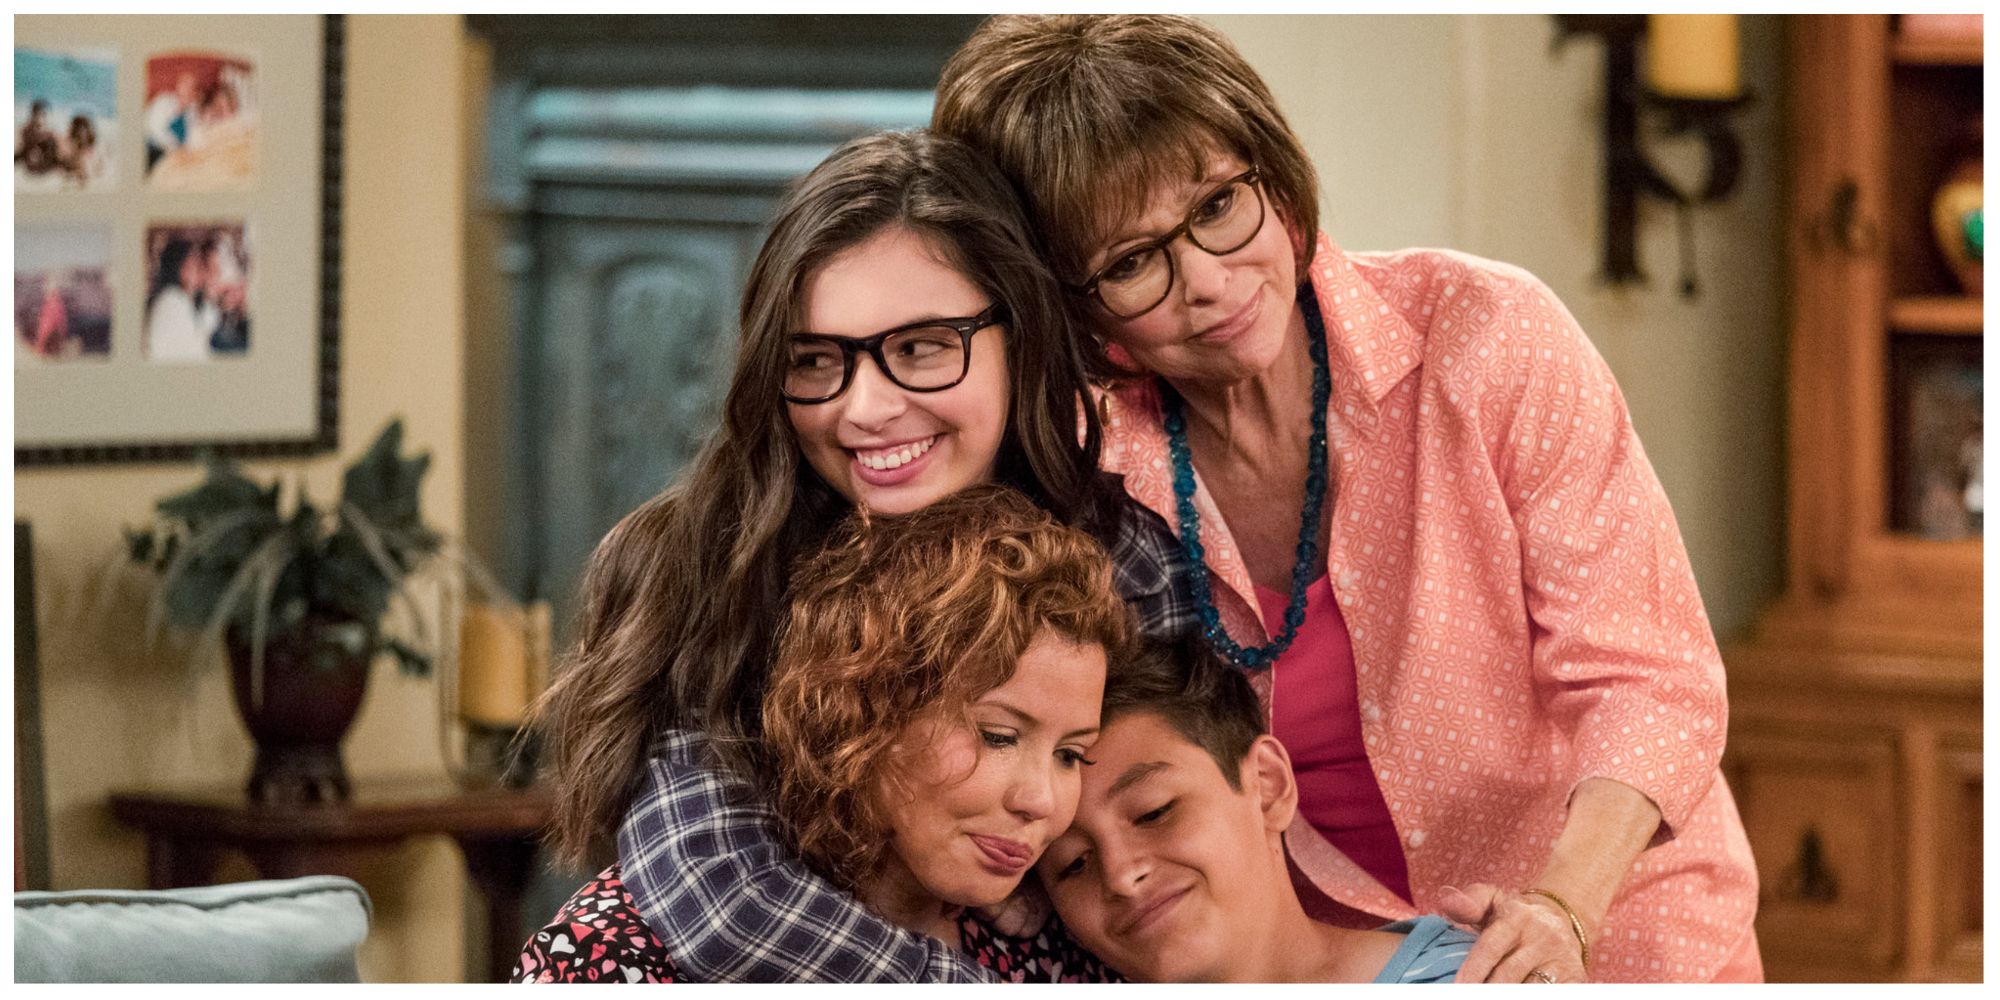 The Alvarez Family, Penelope and her kids, Elena, Alex and Grandmother Lydia in a family hug.